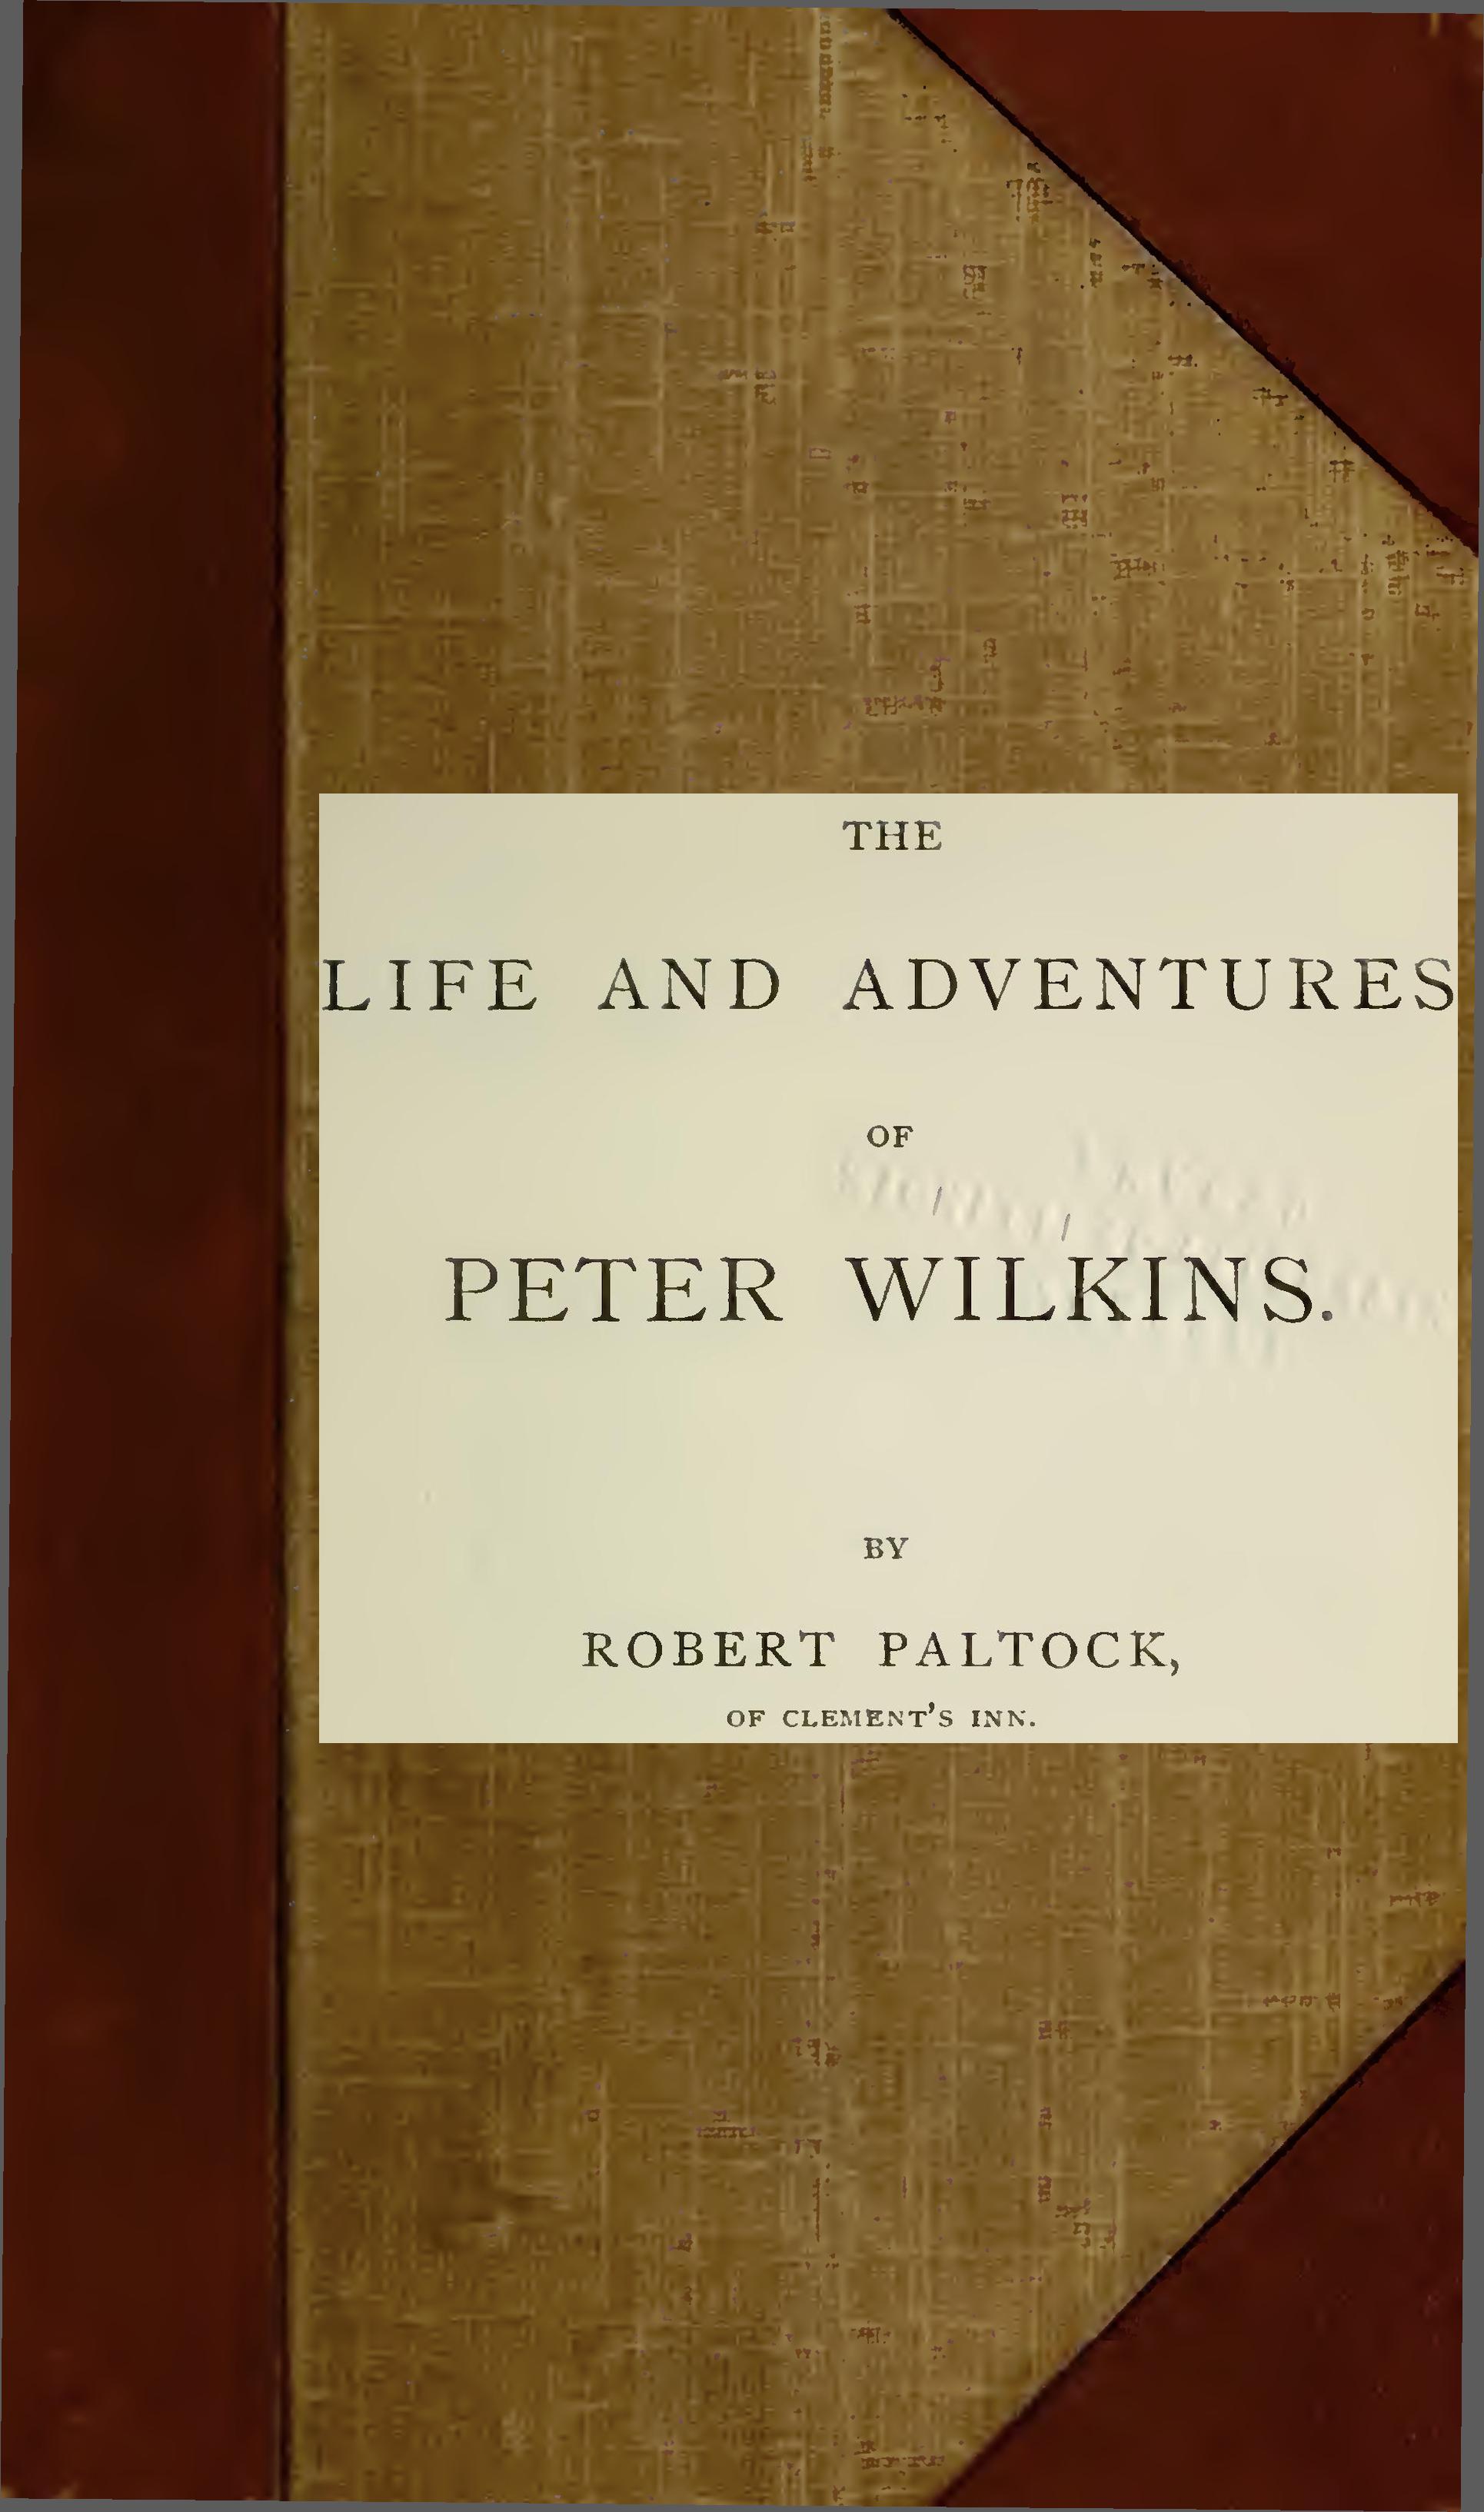 The Life and Adventures of Peter Wilkins, Complete (Volumes 1 and 2)